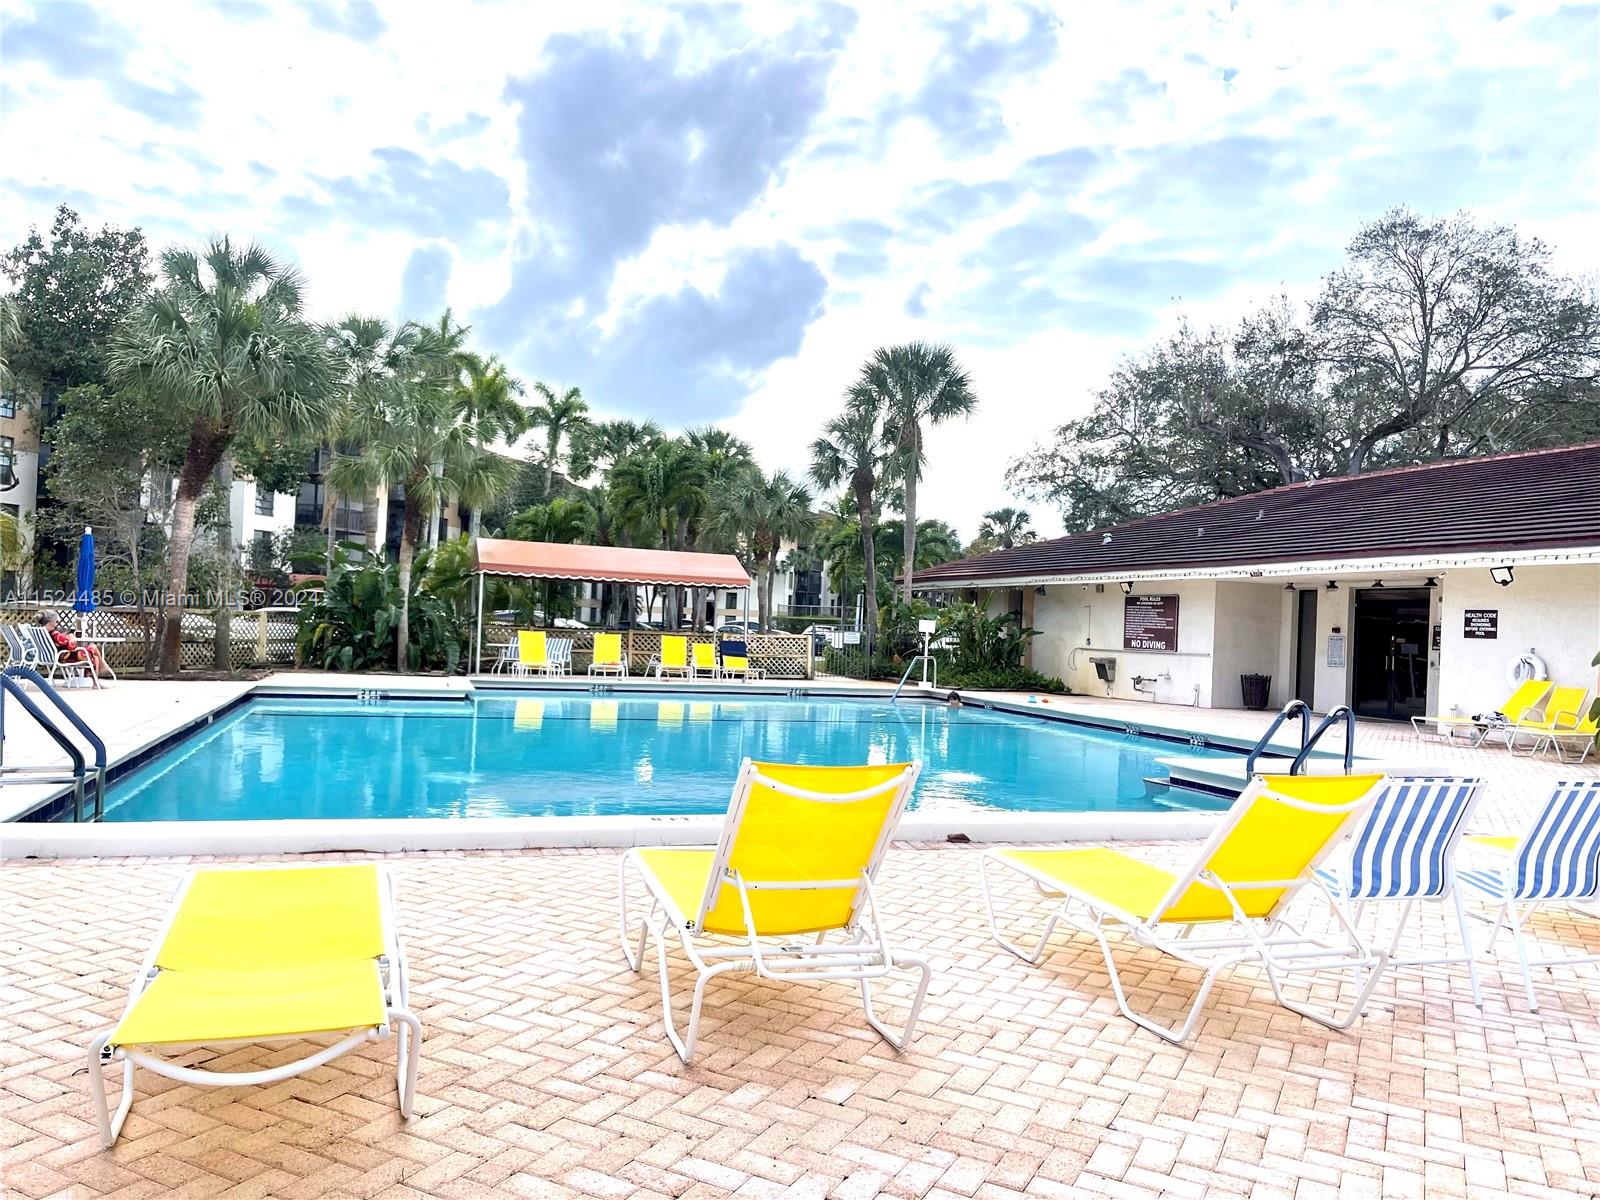 a view of swimming pool with sitting area